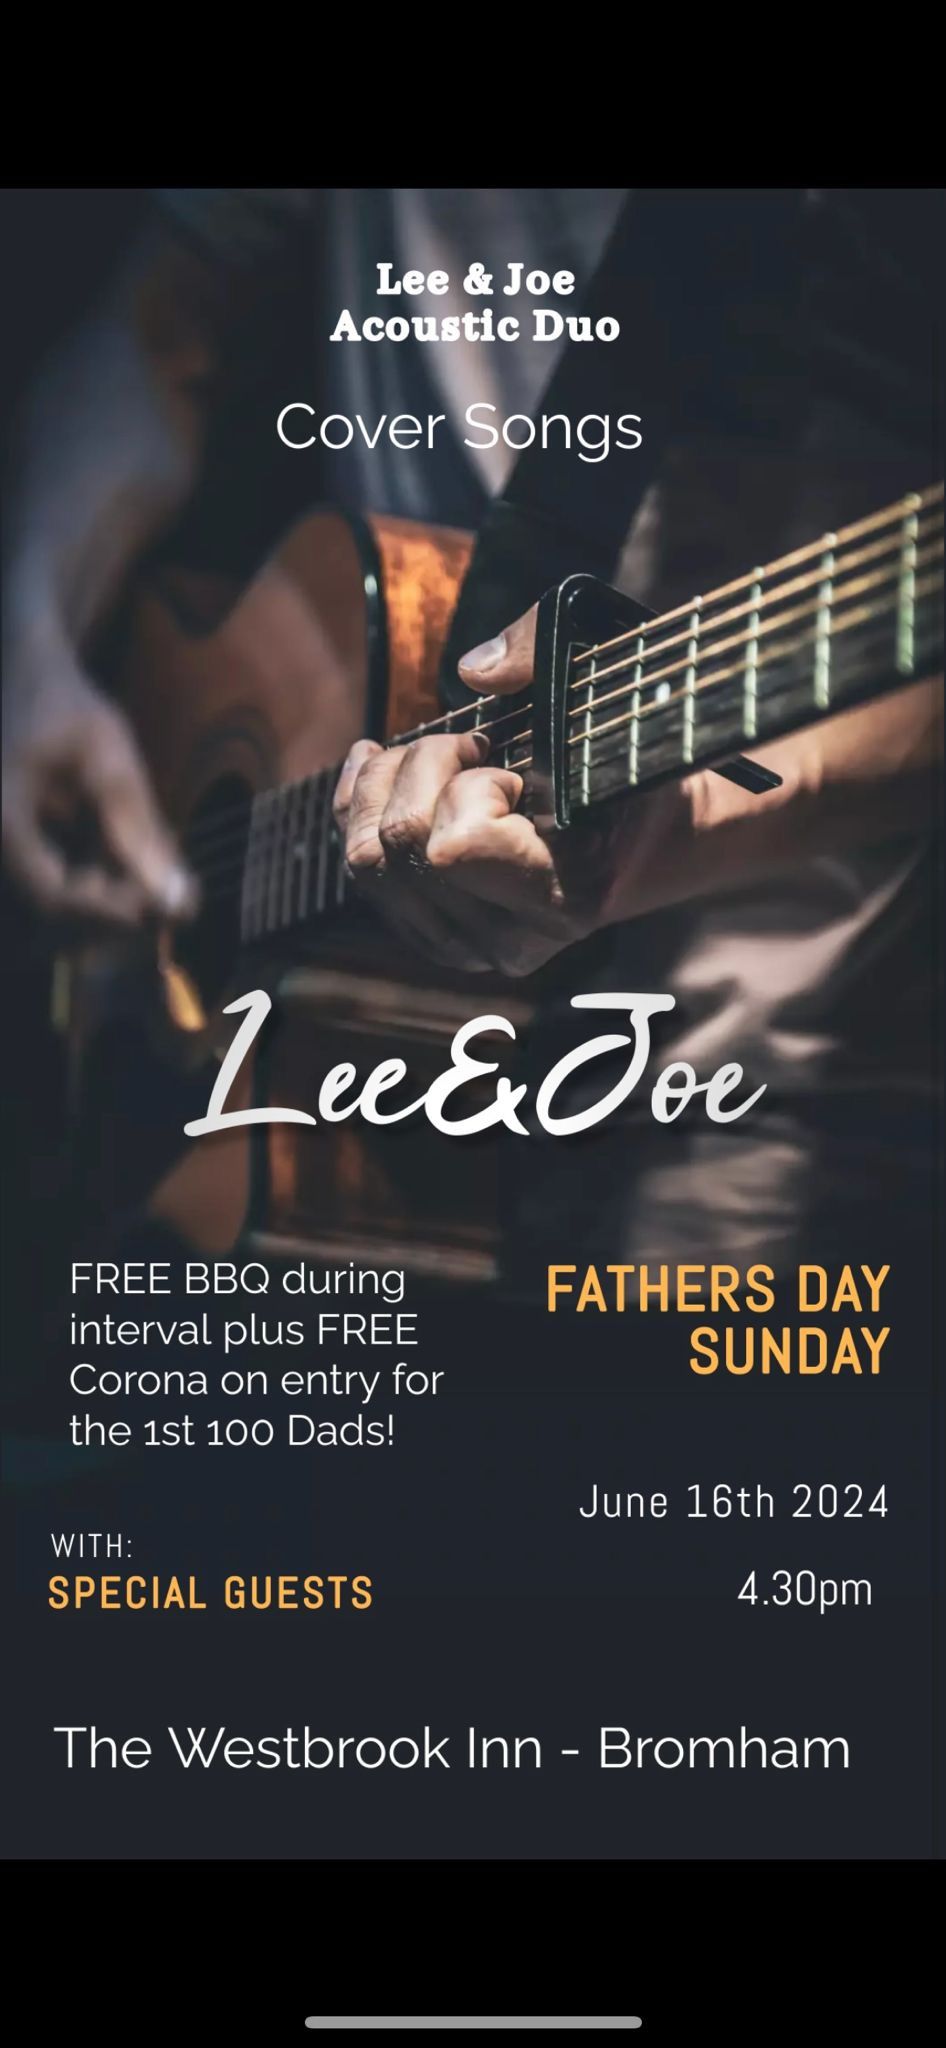 Father\u2019s Day. Live Music, Free BBQ, Free Corona for Dads on arrival 